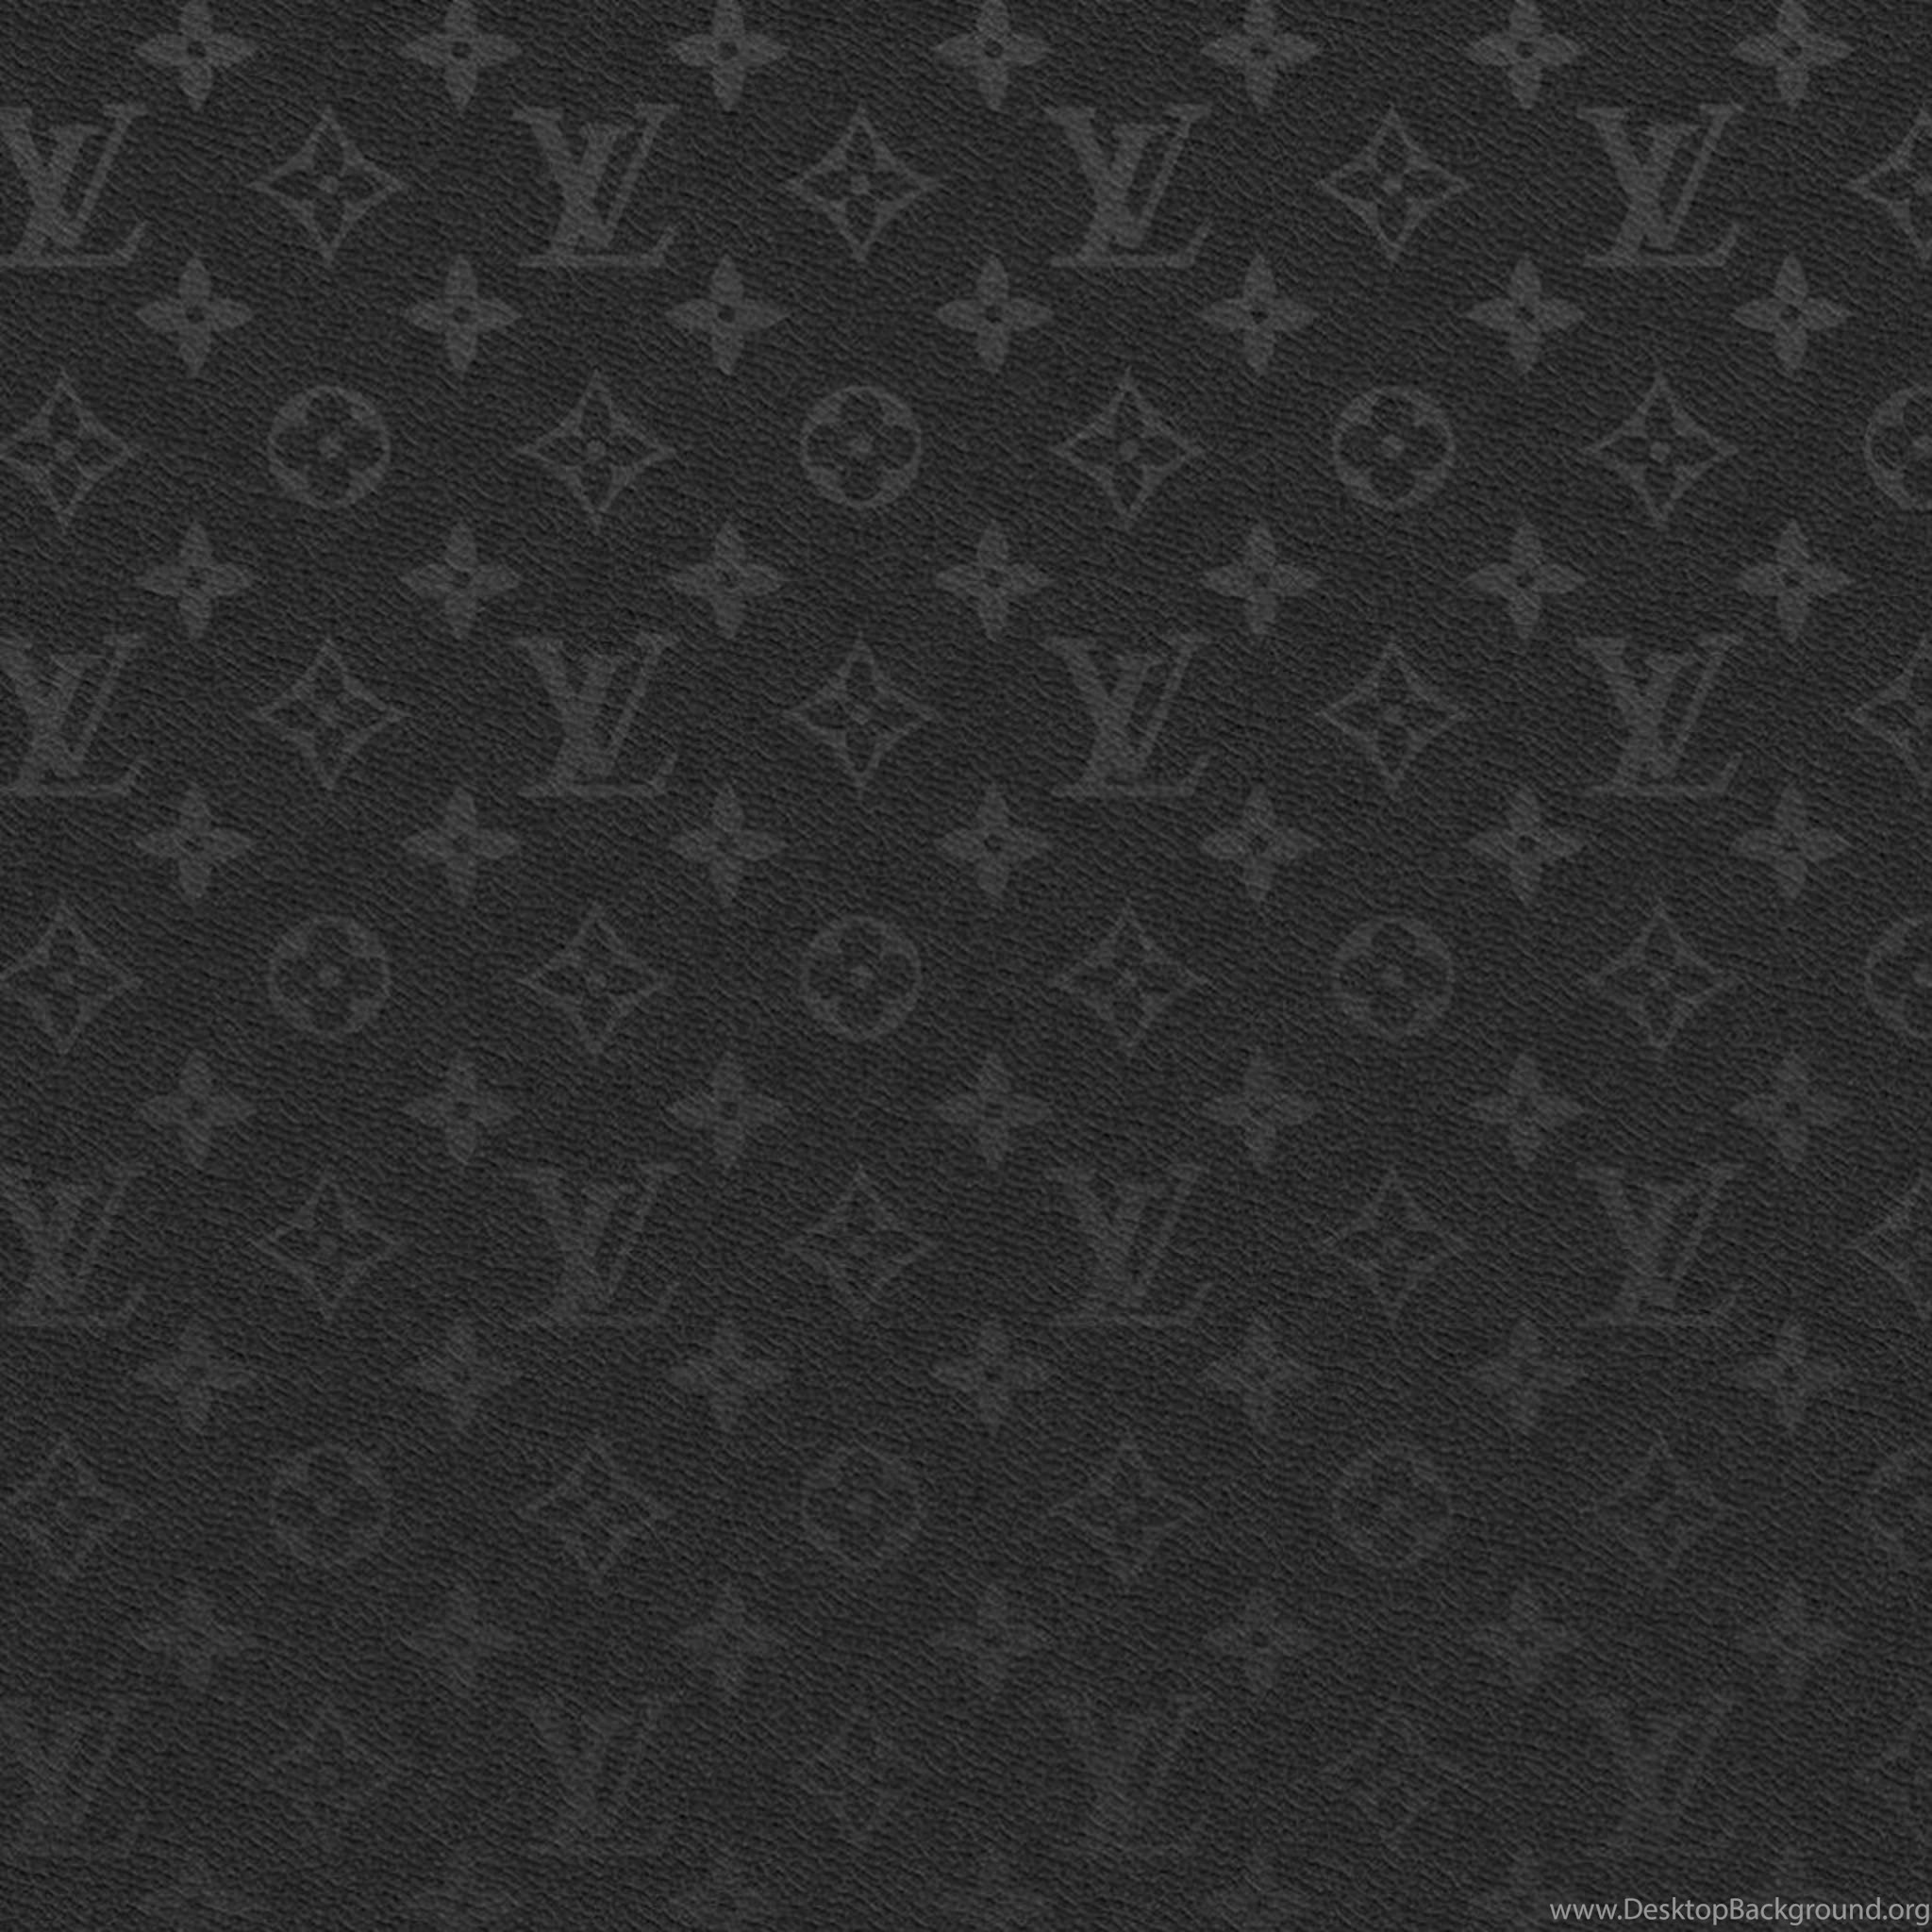 Wallpapers Pay Phone Louis Vuitton Iphone 640x960 #pay phone